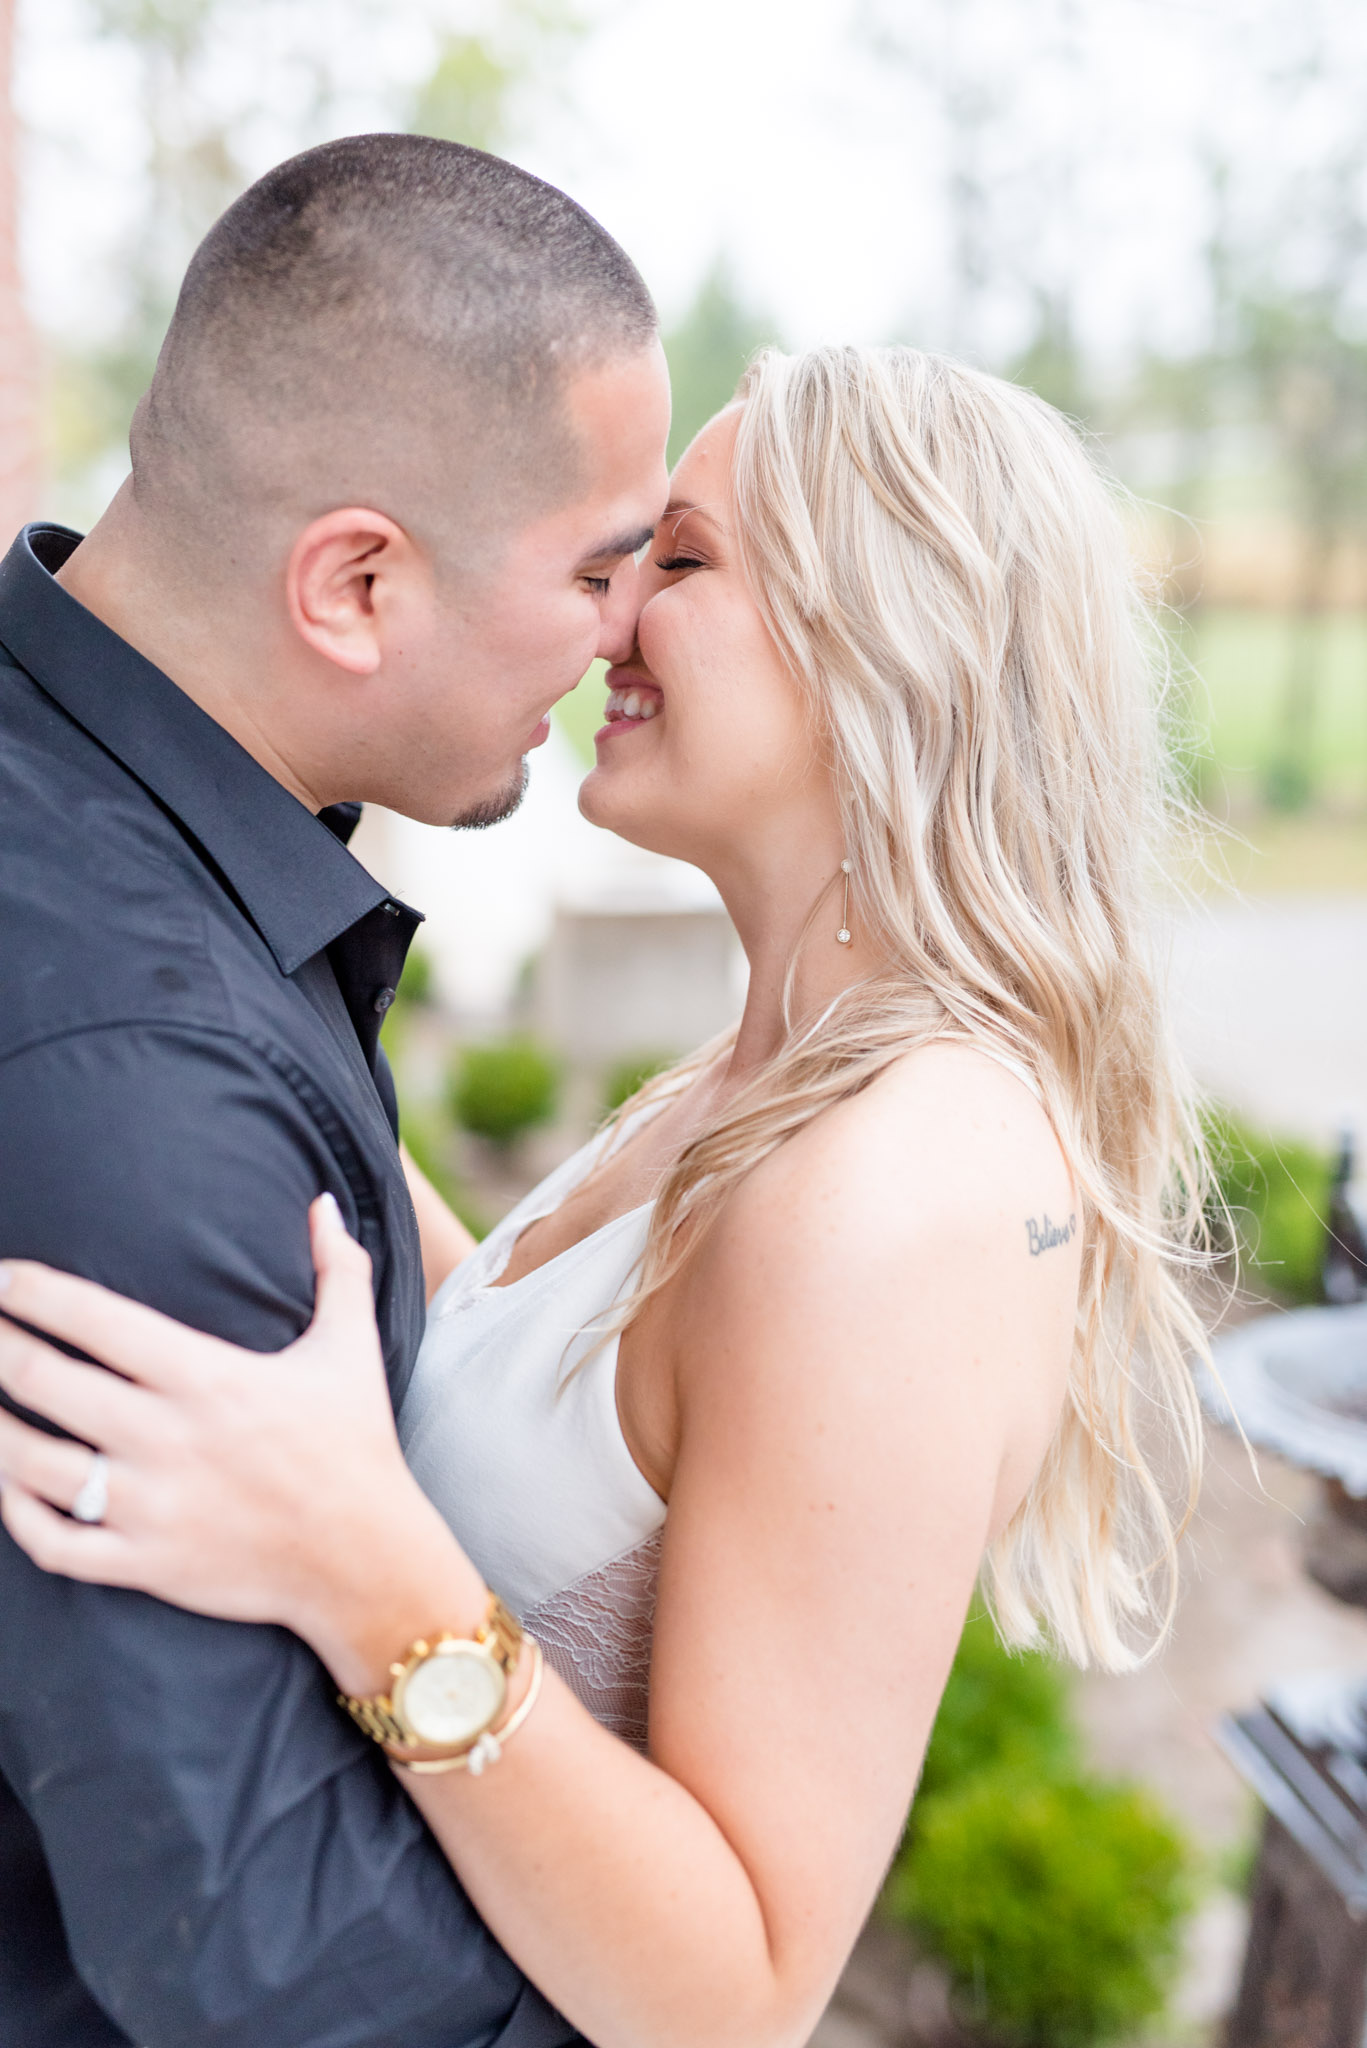 Groom leans bride back during engagement pictures.